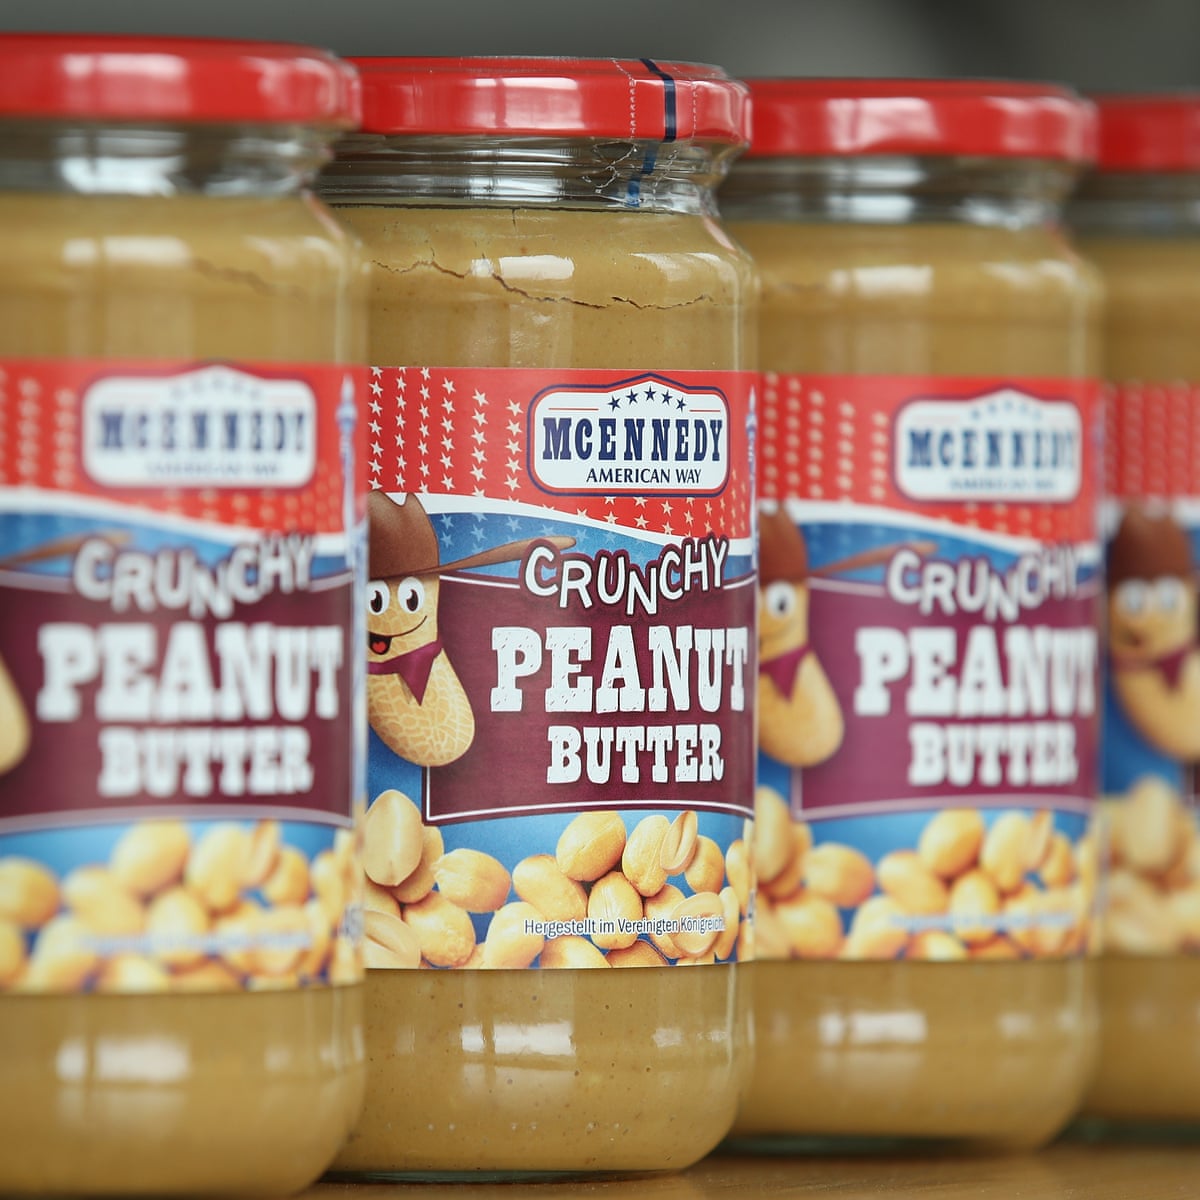 Why do peanut butter jars have that awkward rim at the top? | Food | The  Guardian